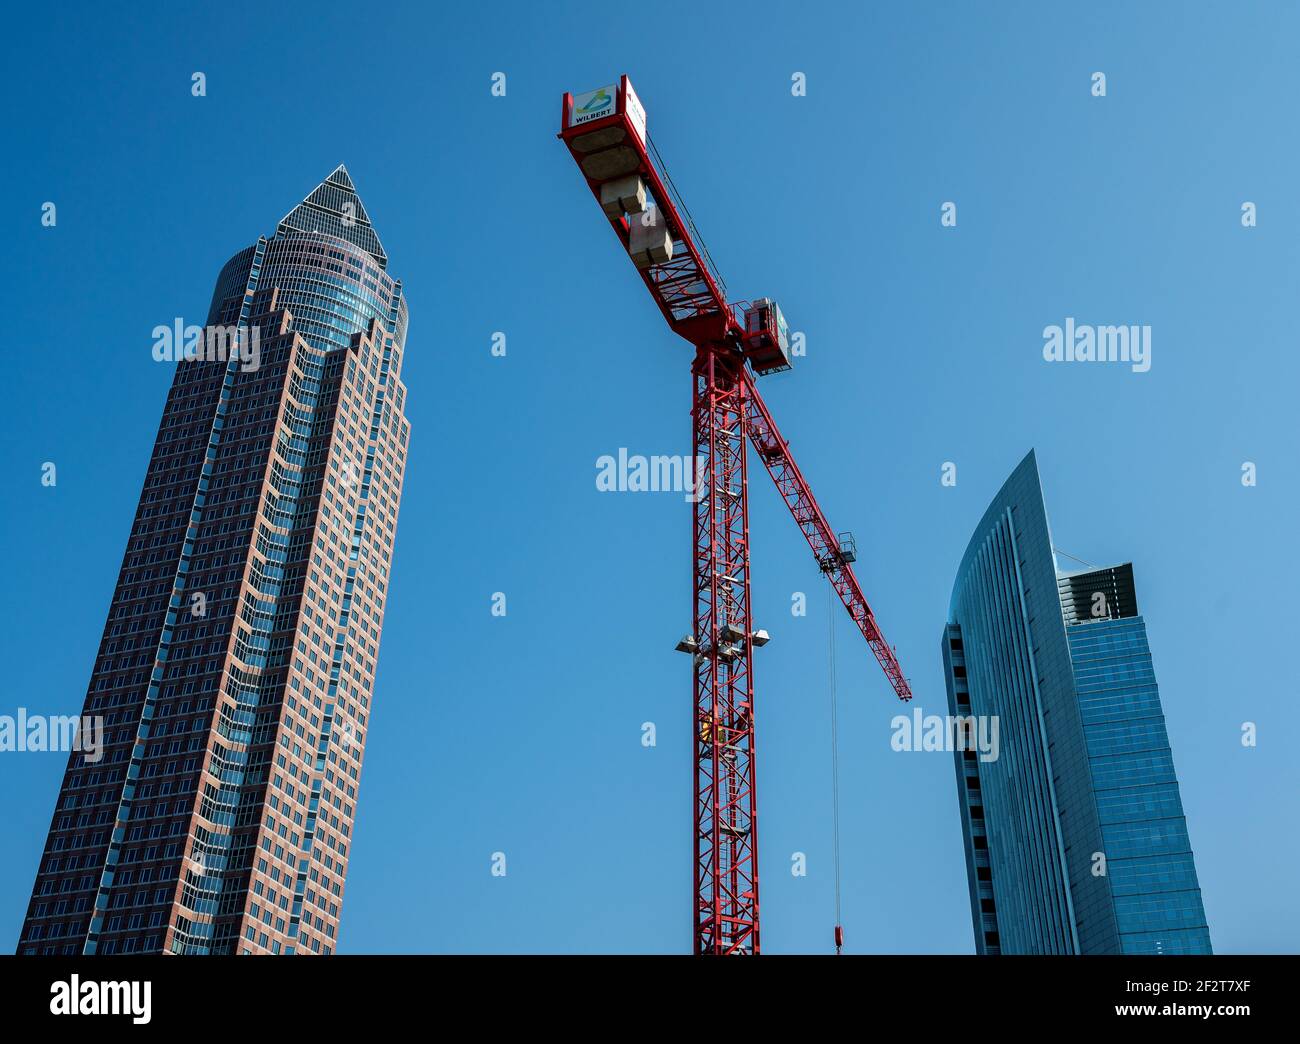 Skyscrapers and shopping centers in the newly built europaviertel in frankfurt am main, germany Stock Photo